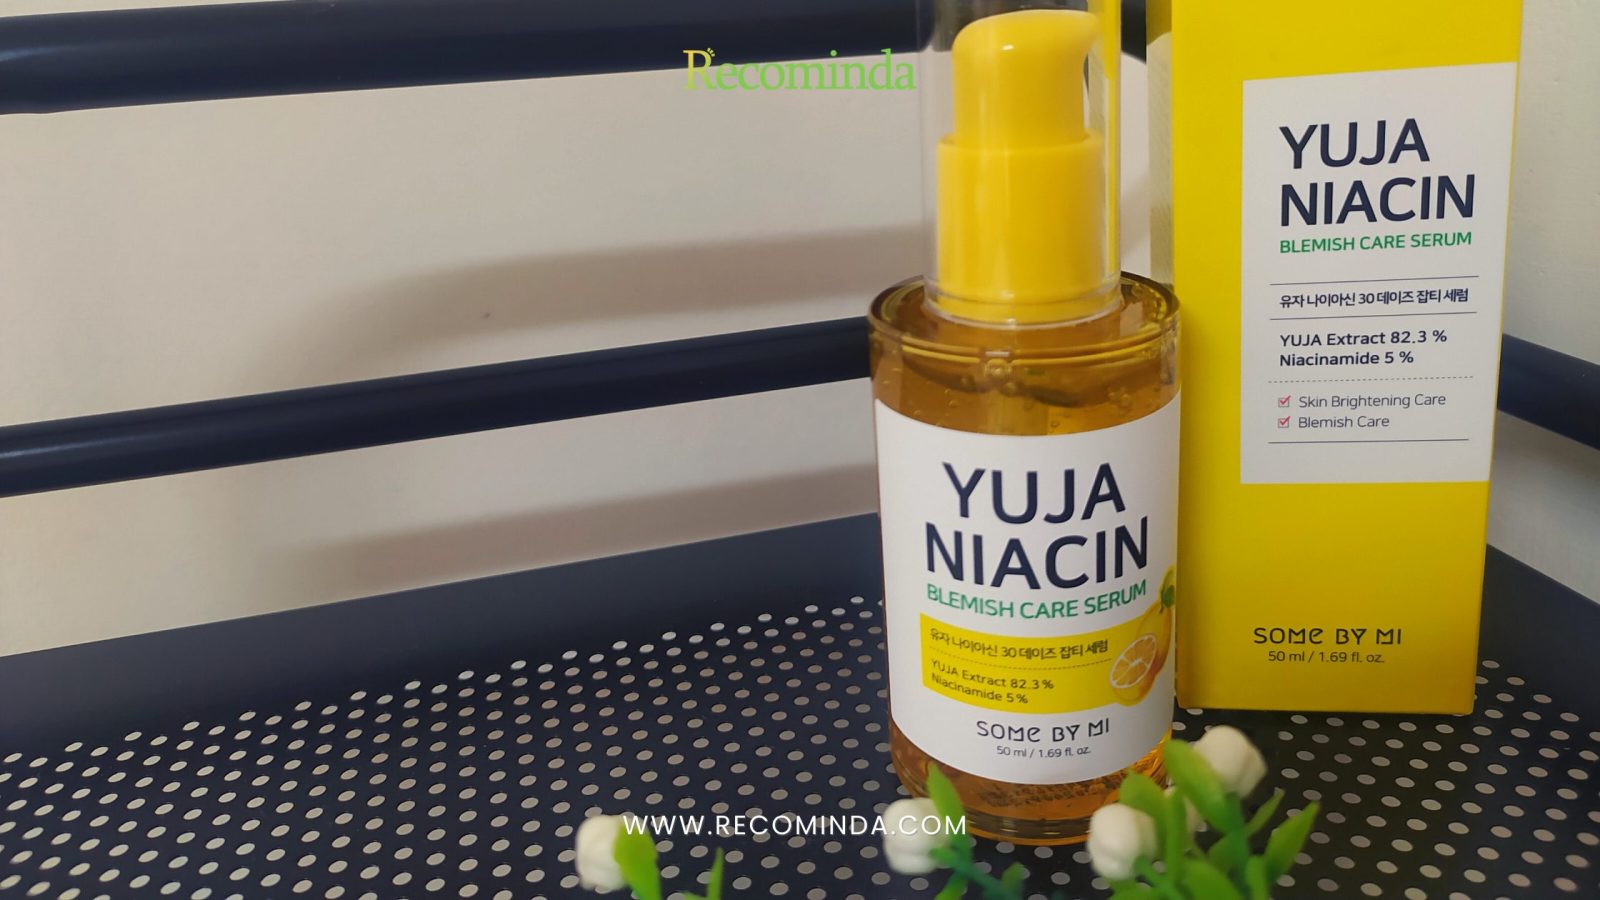 Review: Some By Mi Yuja Niacin Blemish Care Serum